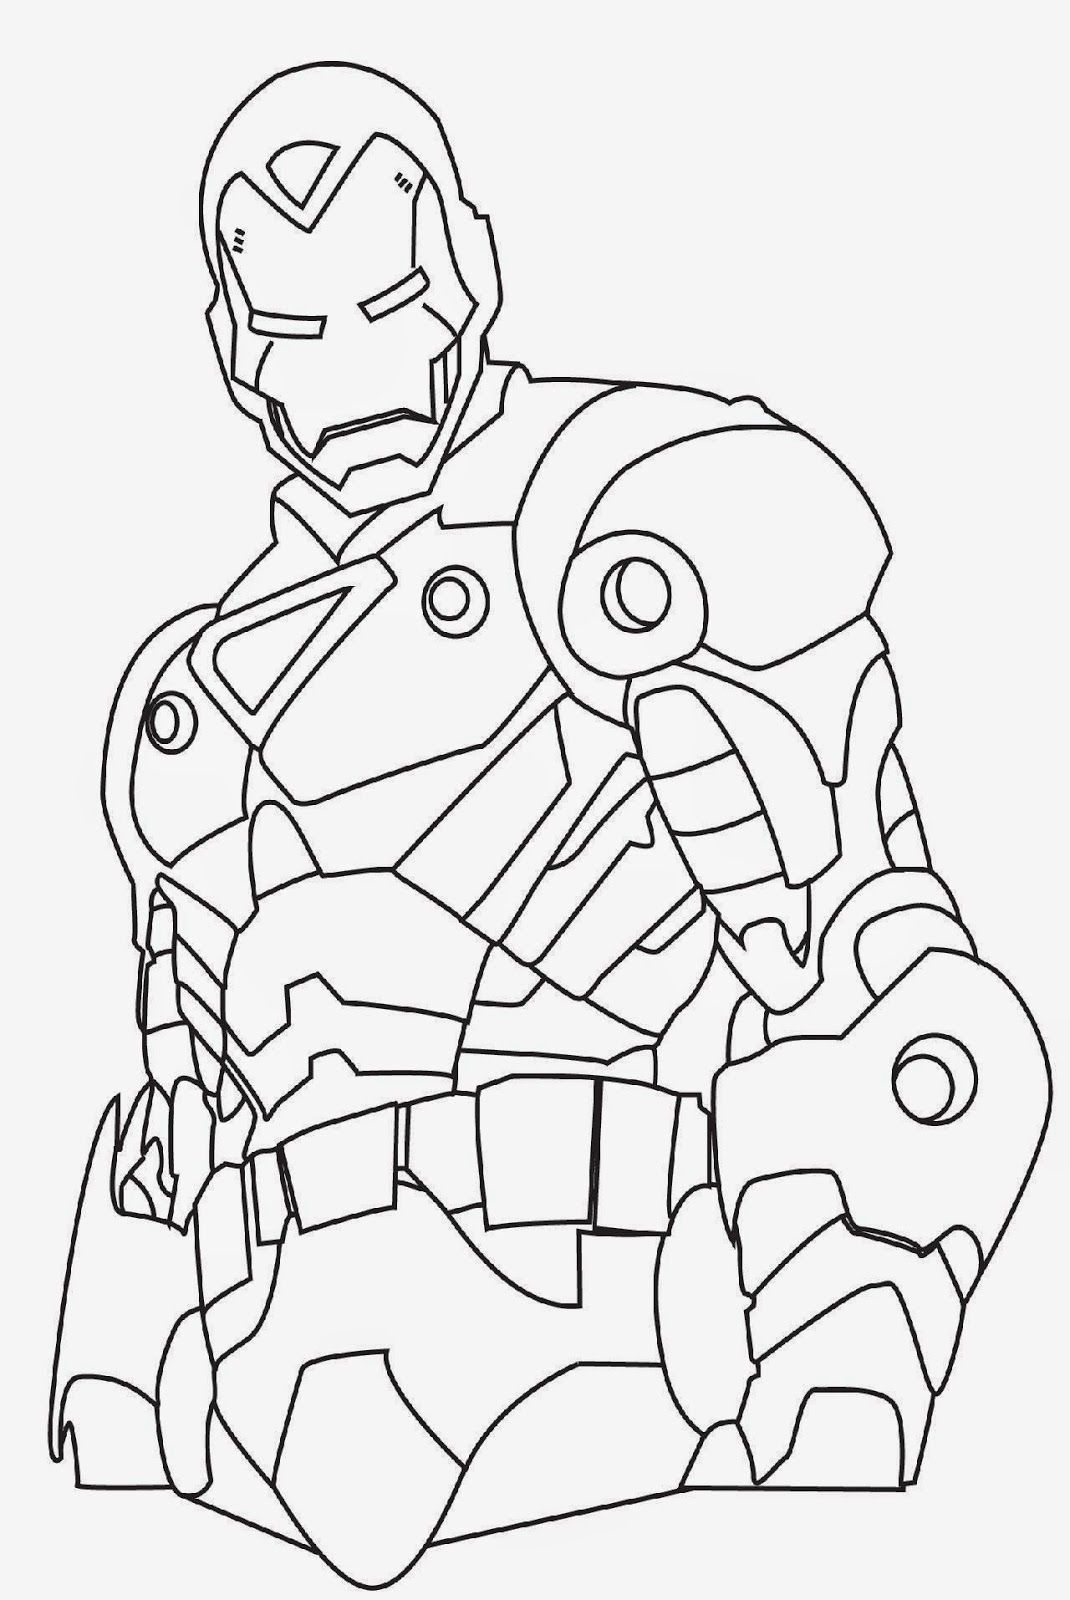 Ironman Coloring Pages | Free Coloring Pages